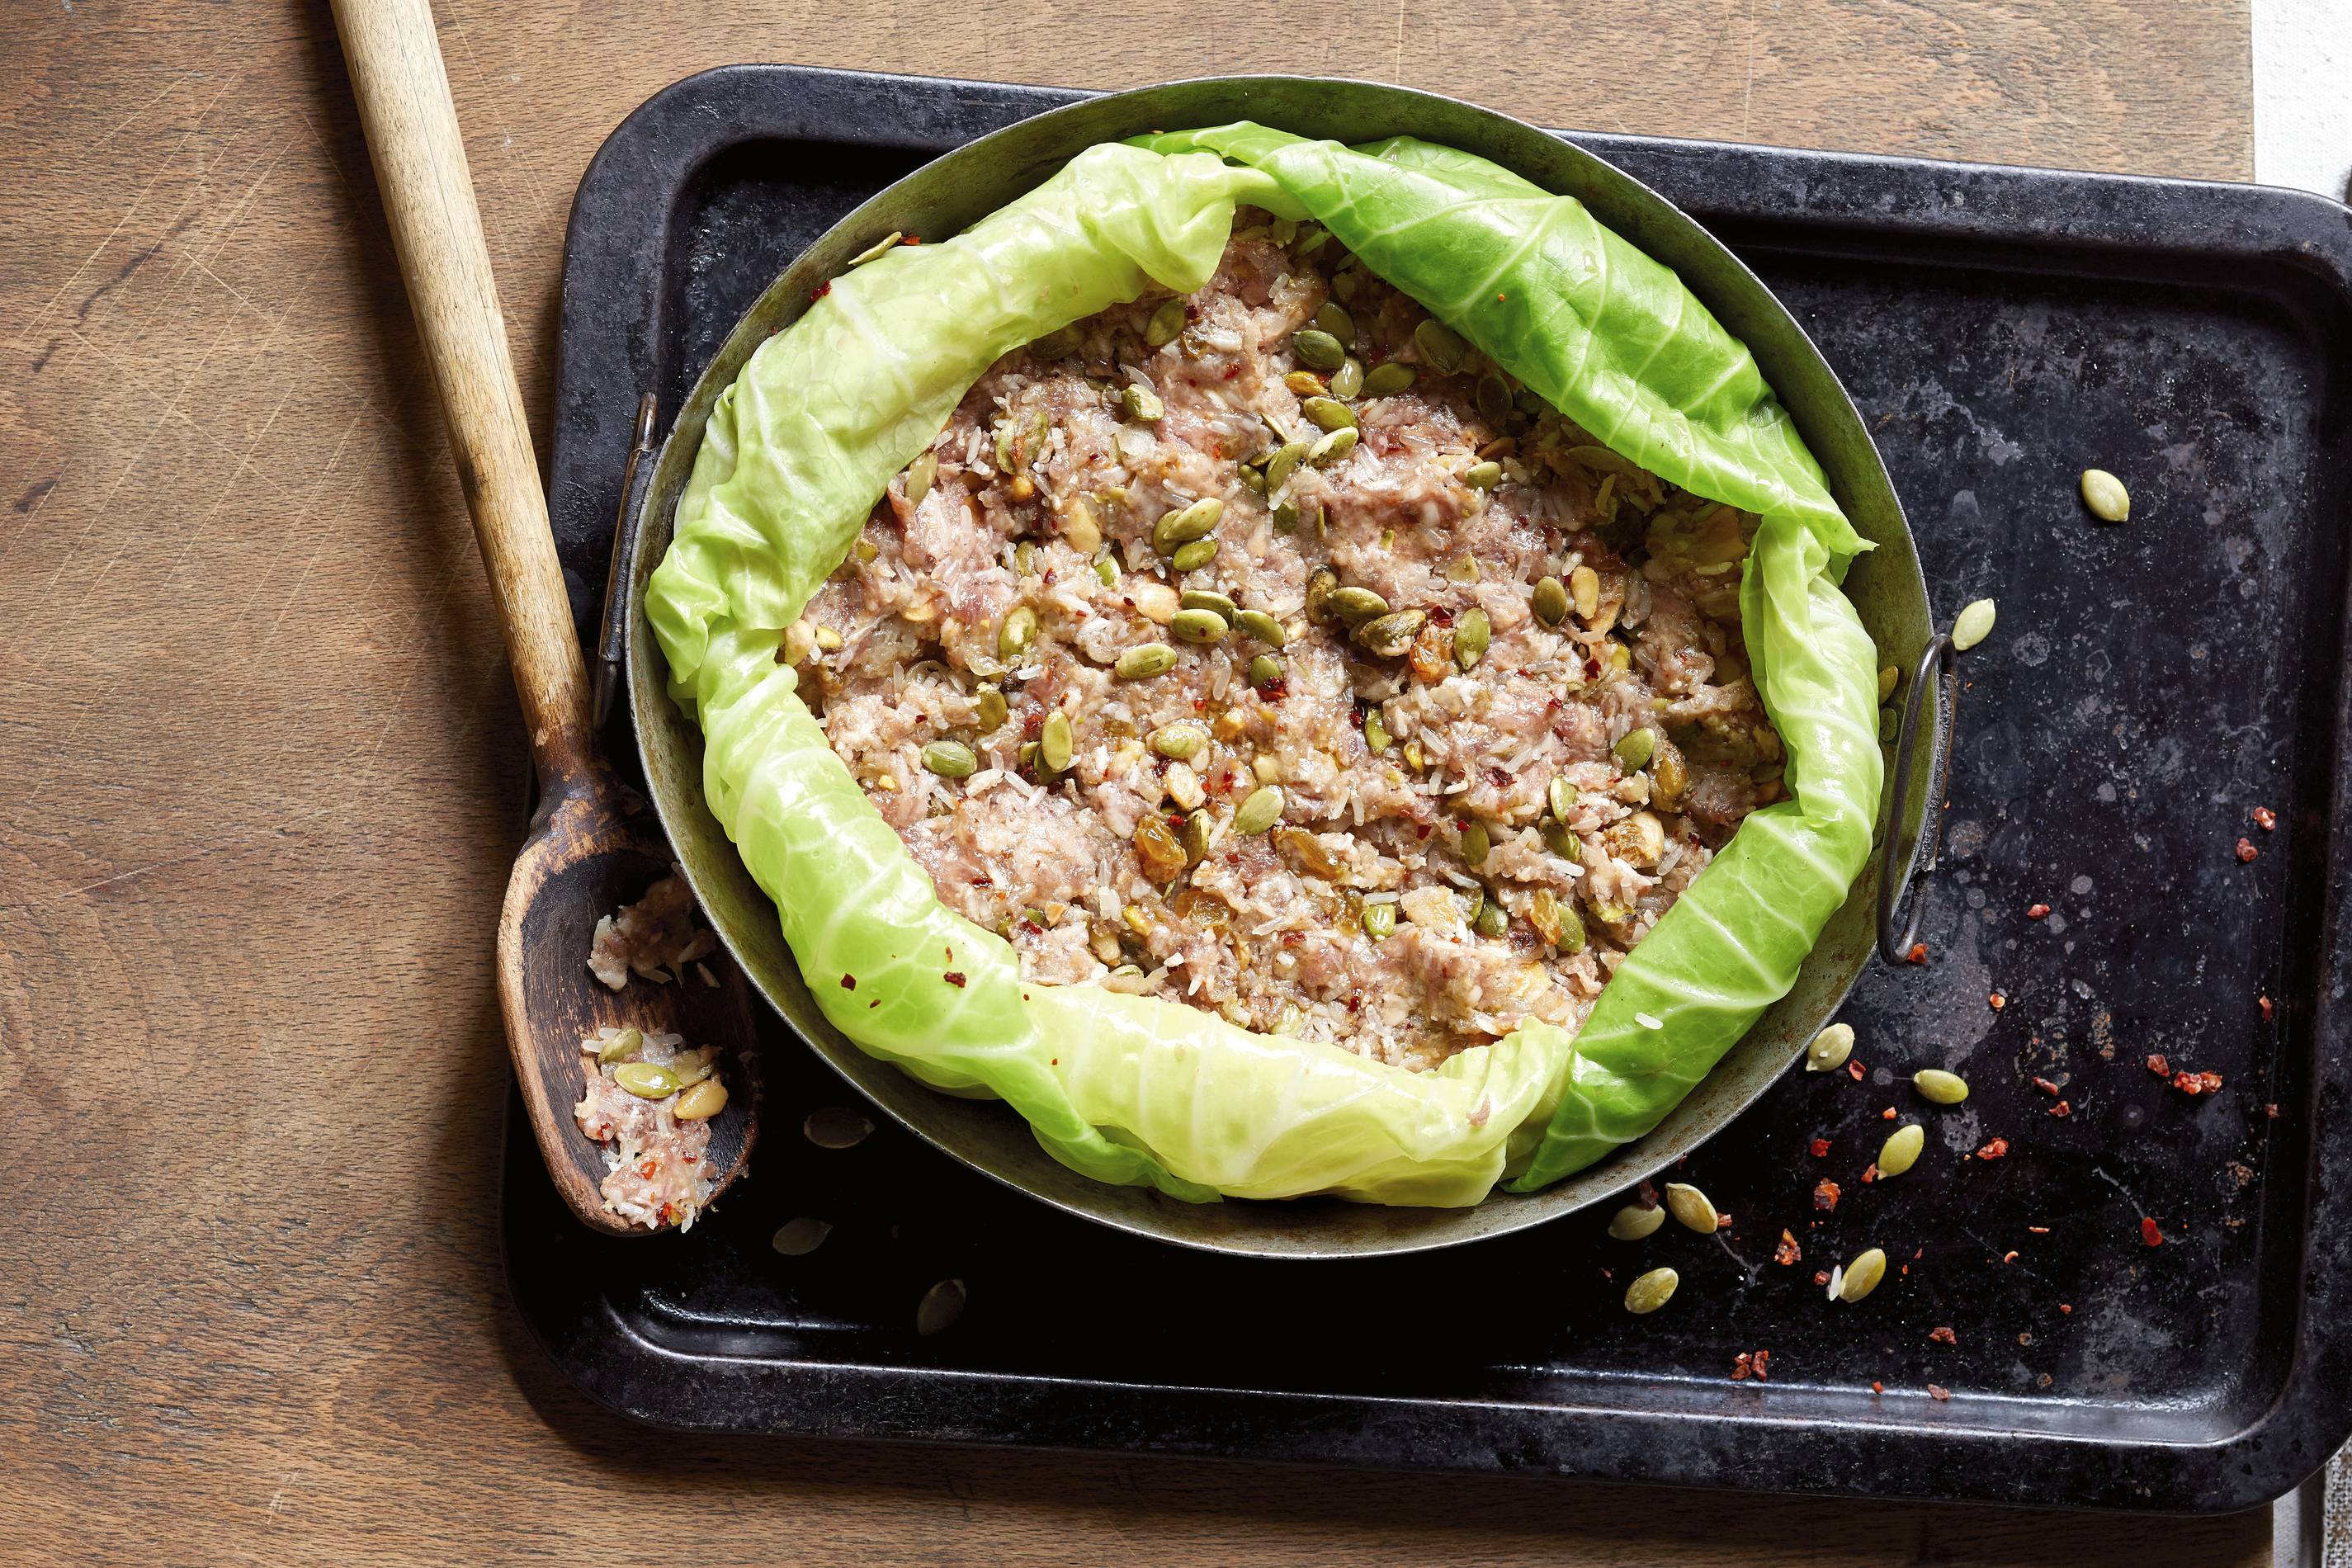 Cabbage Cake stuffed with beef, nuts and raisins